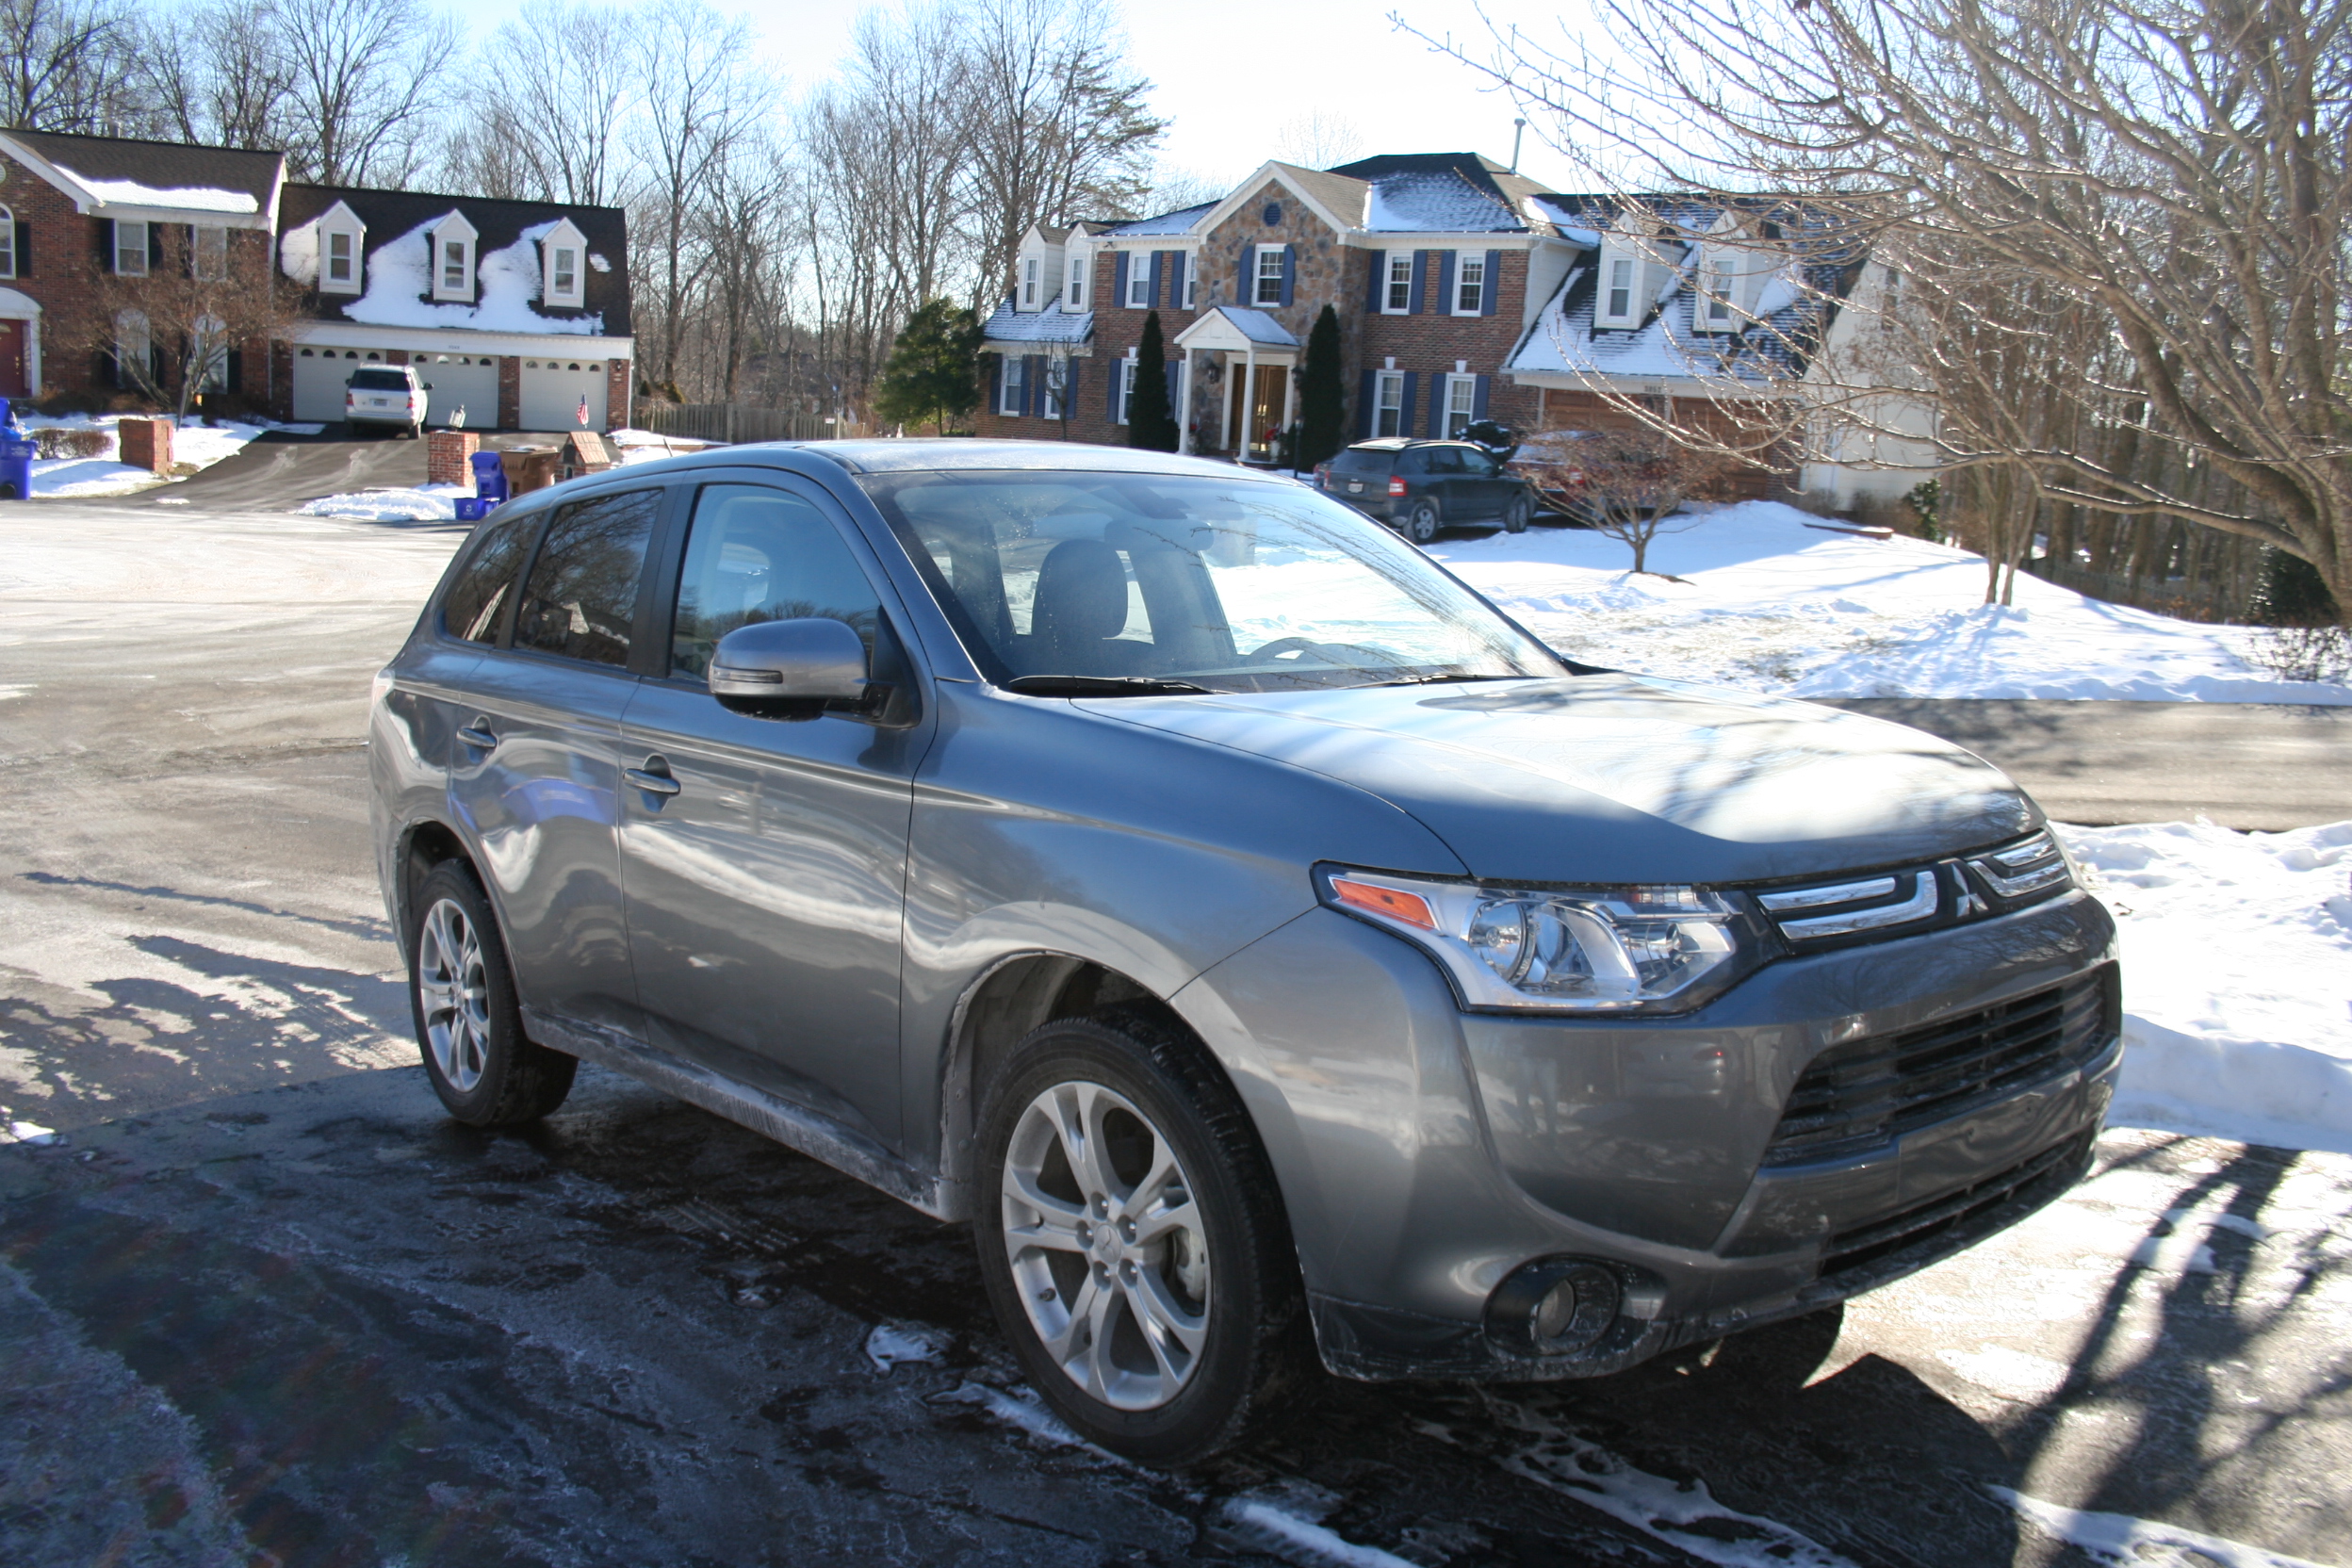 Car Report: New Outlander gives you space, safety, style